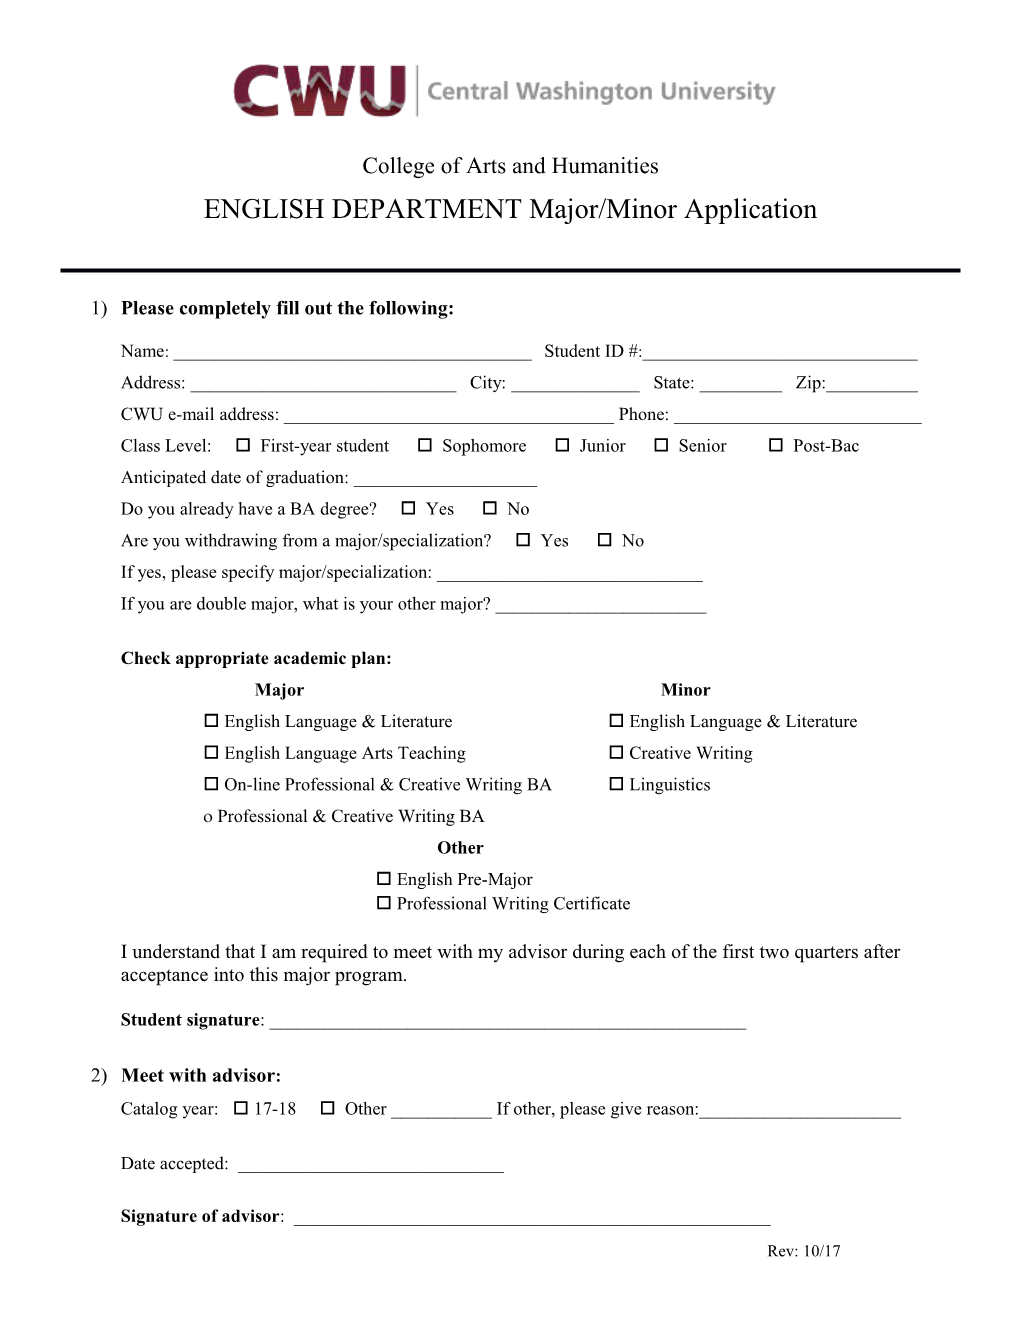 1) Please Completely Fill out the Following